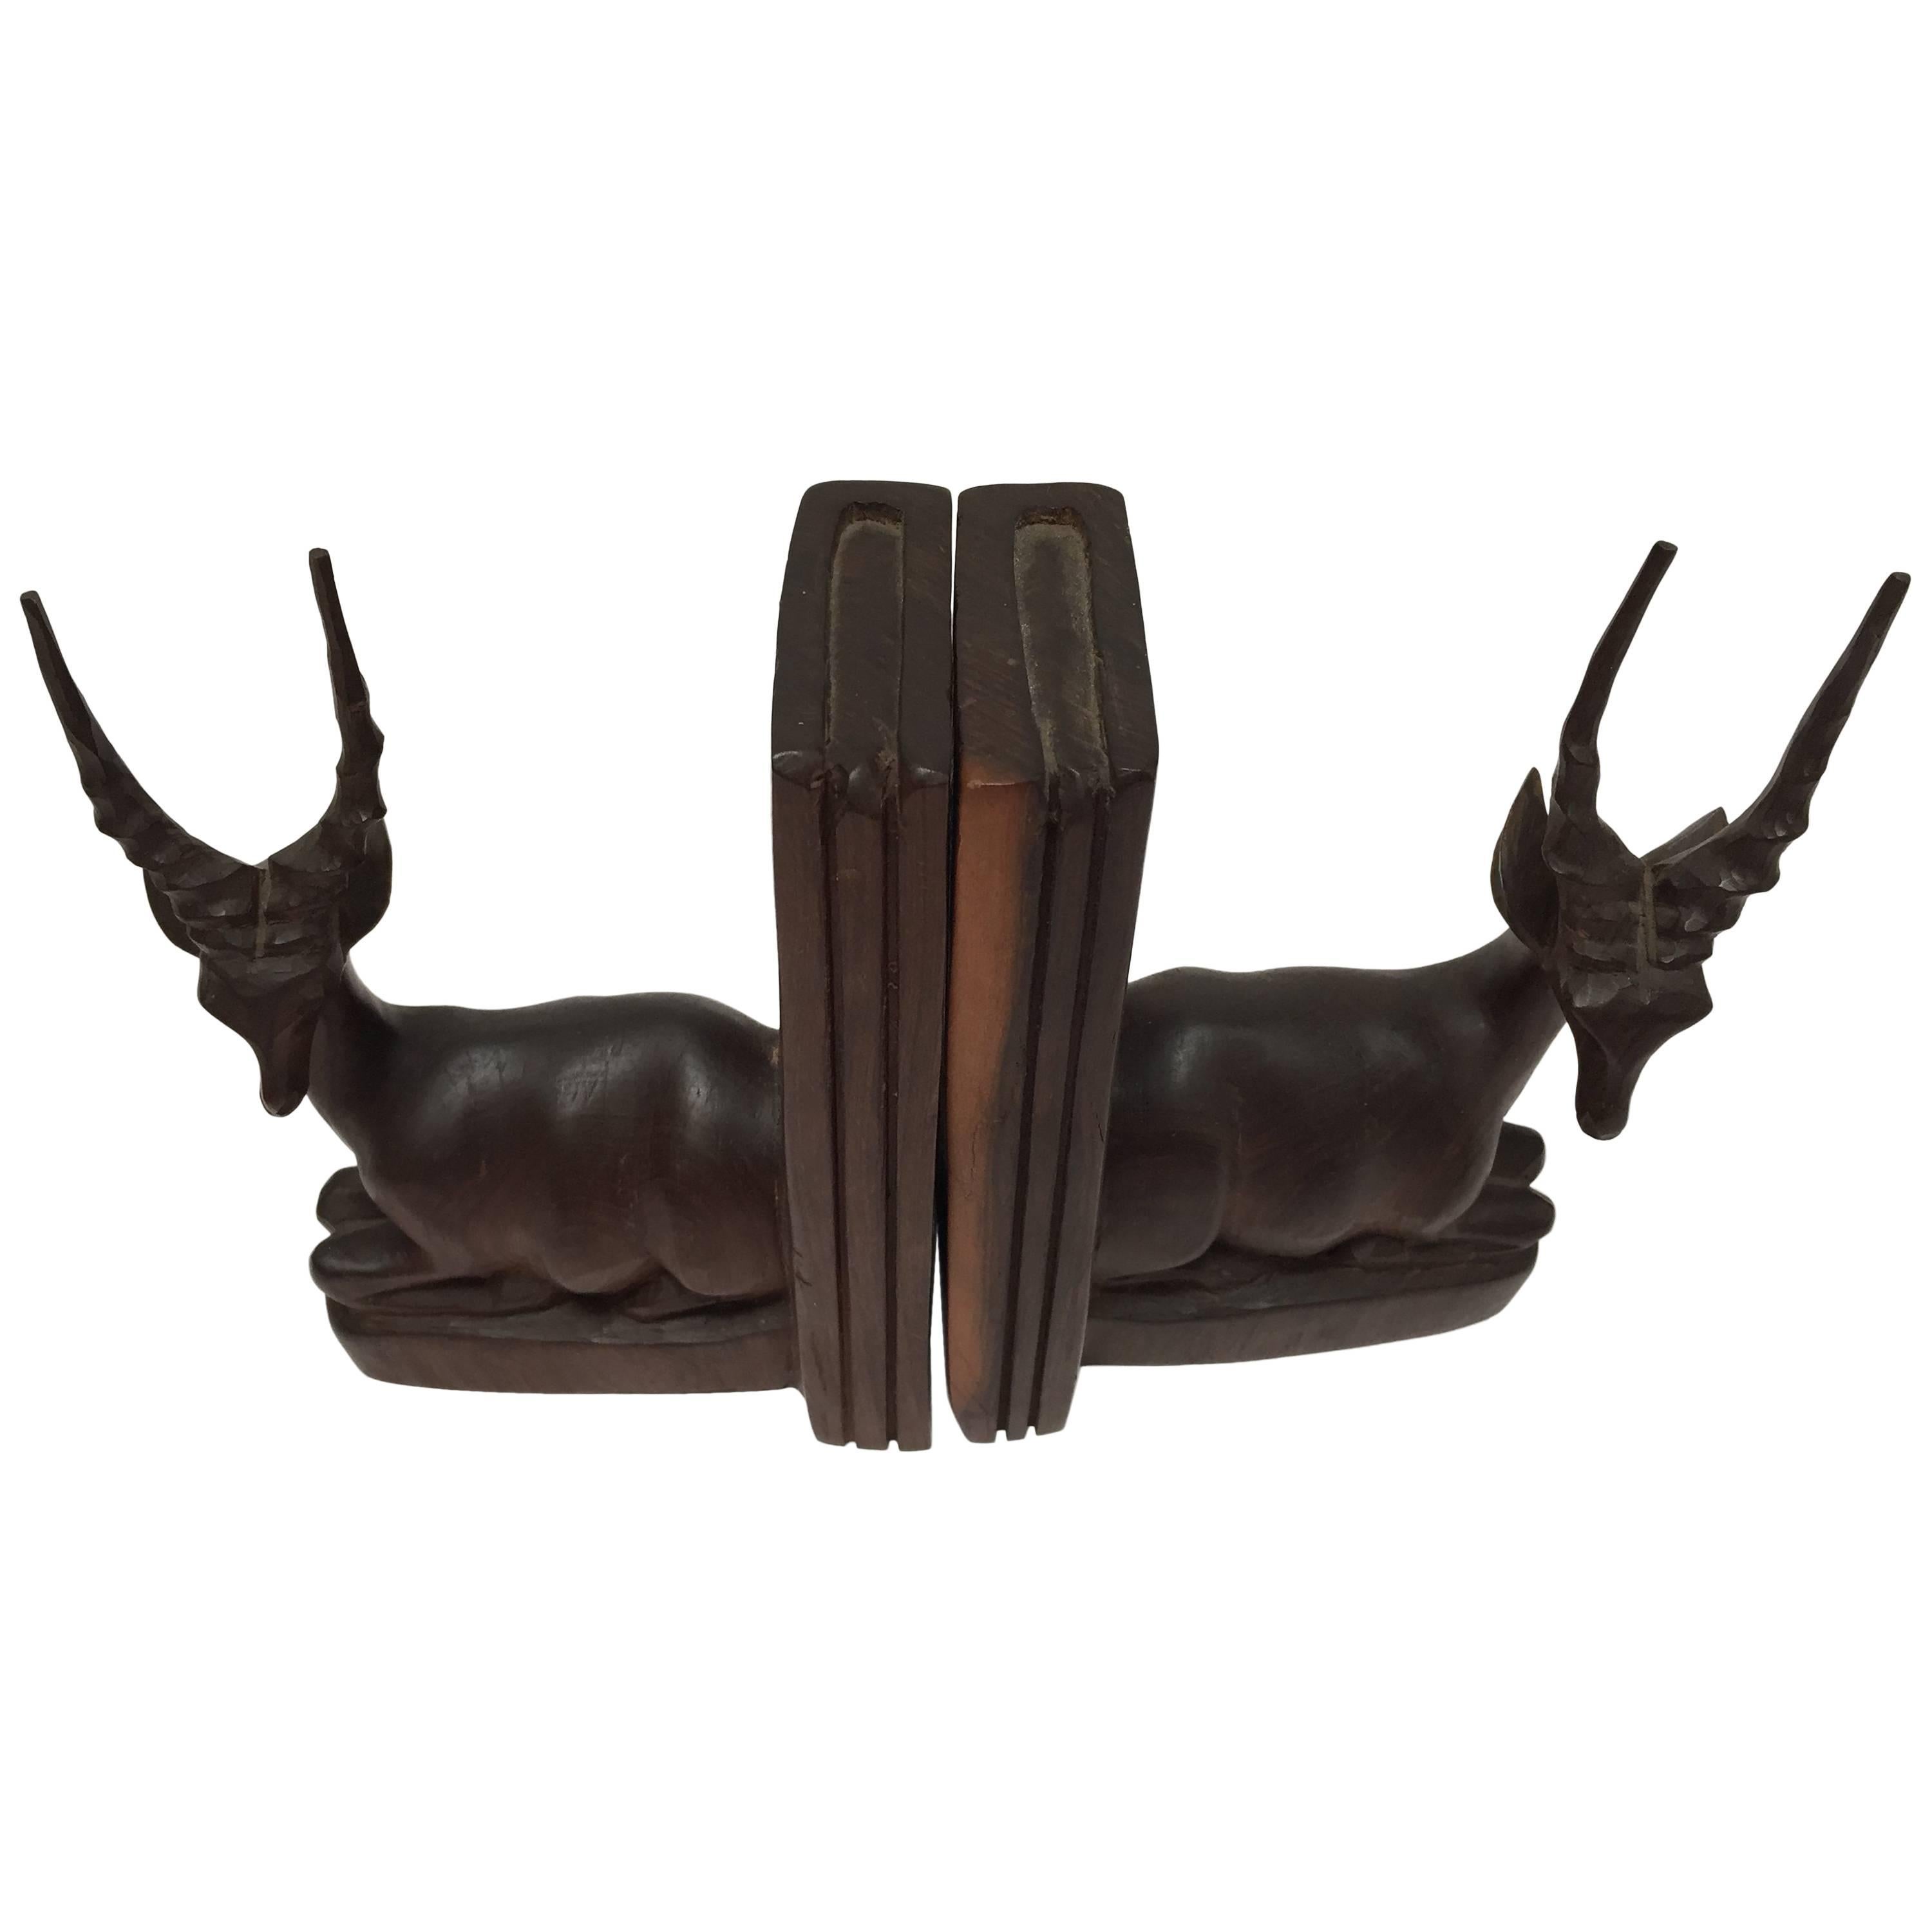 Nice pair of hand-carved  Mid-Century Deer Antelope bookends
Pair of carved wood bookends of African antelopes.
These are hand-carved and therefore not completely identical.
circa 1950 
Size for each piece is 8.25 in H. x 8.25 in W. x 4in